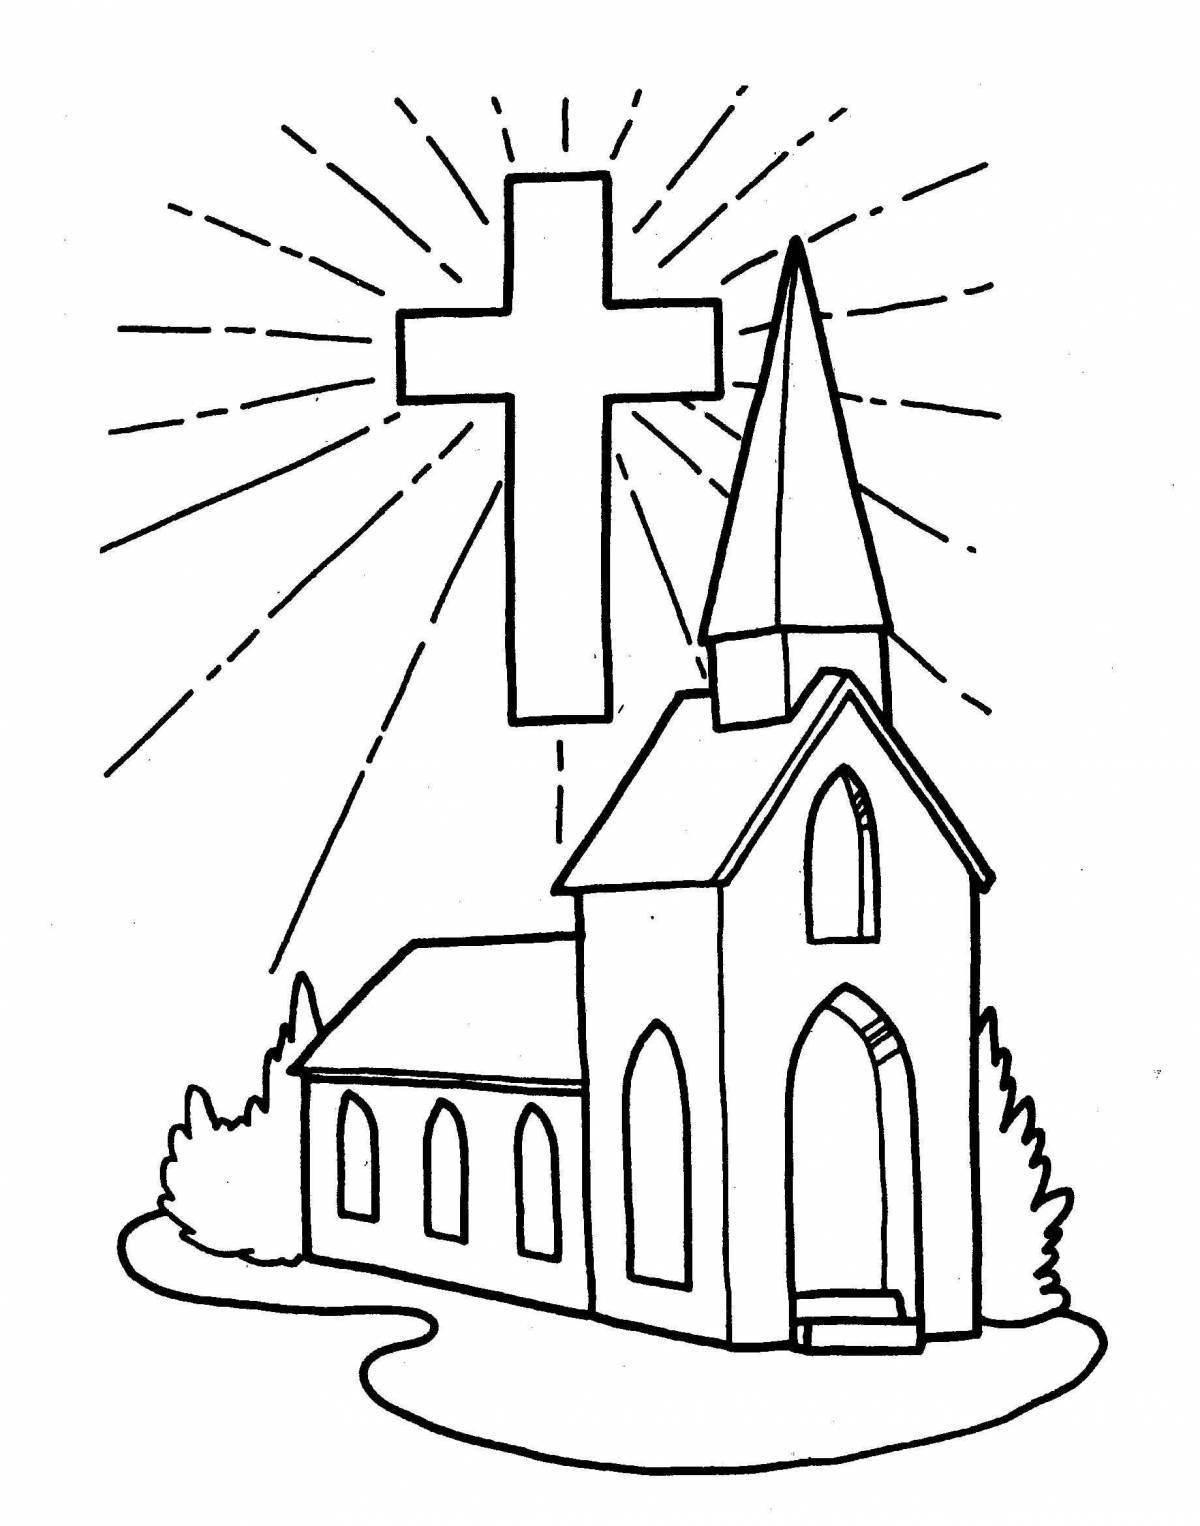 Shining temple coloring page for kids